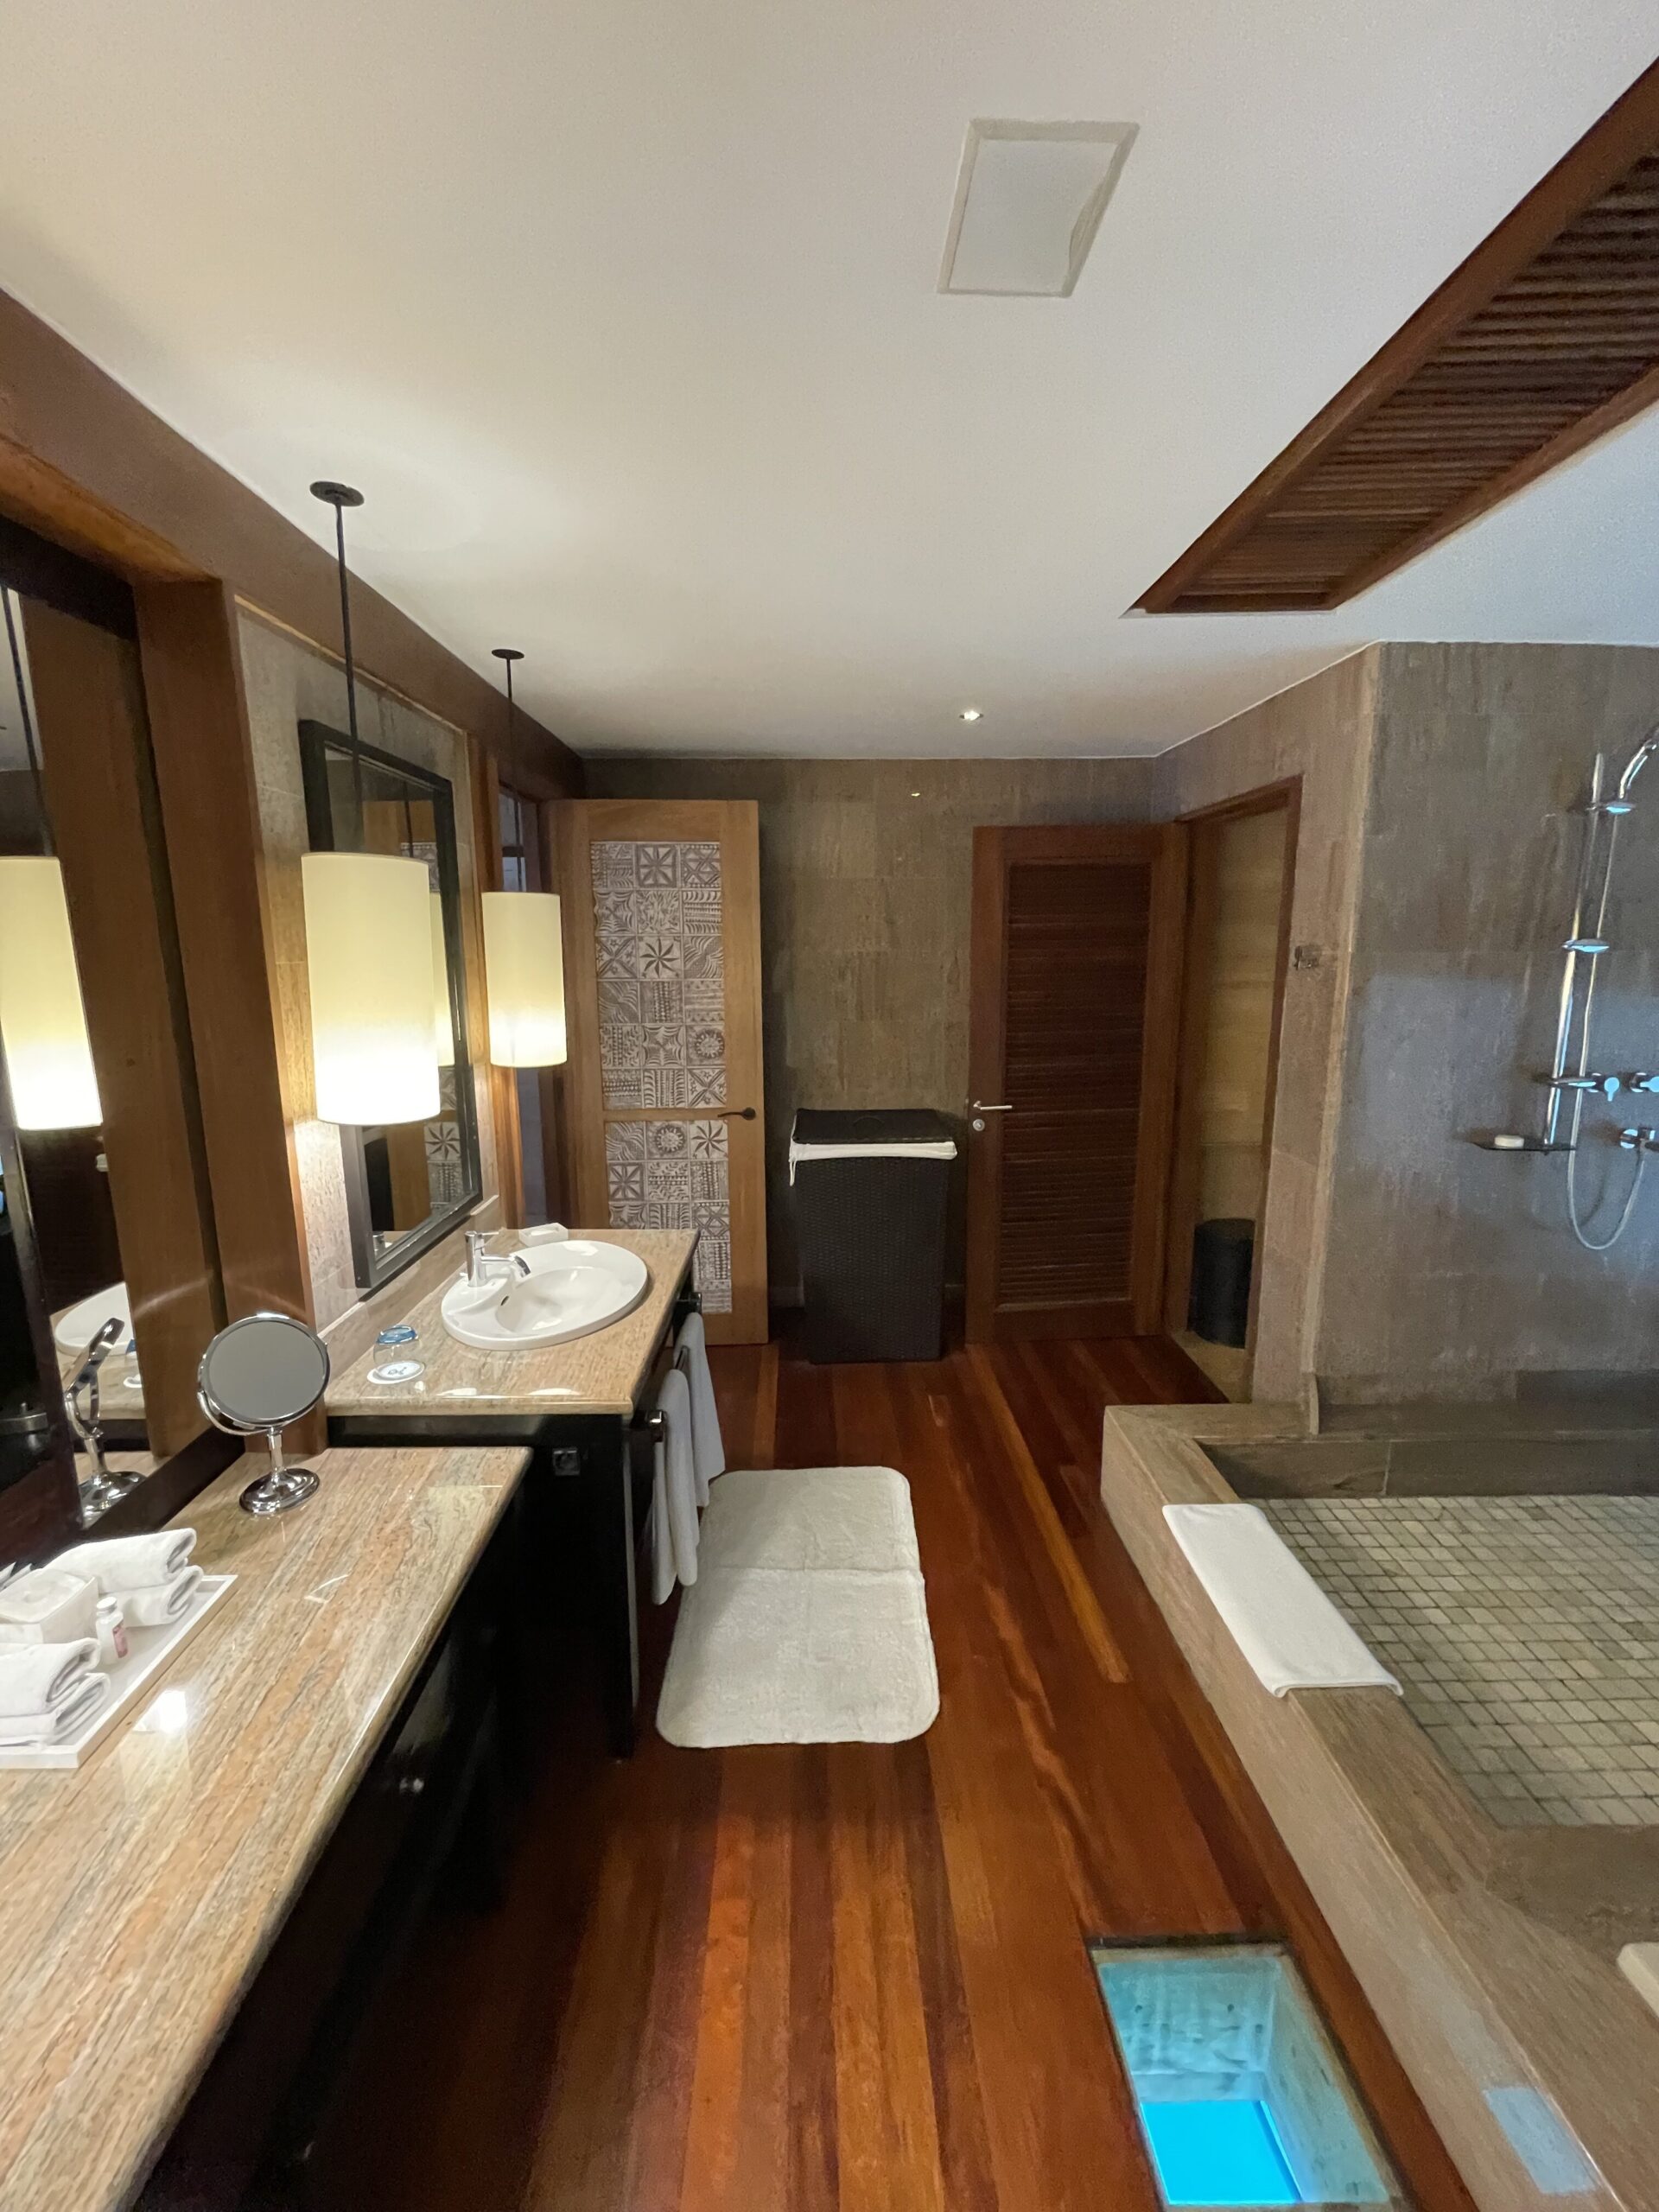 a bathroom with a wood floor and a shower